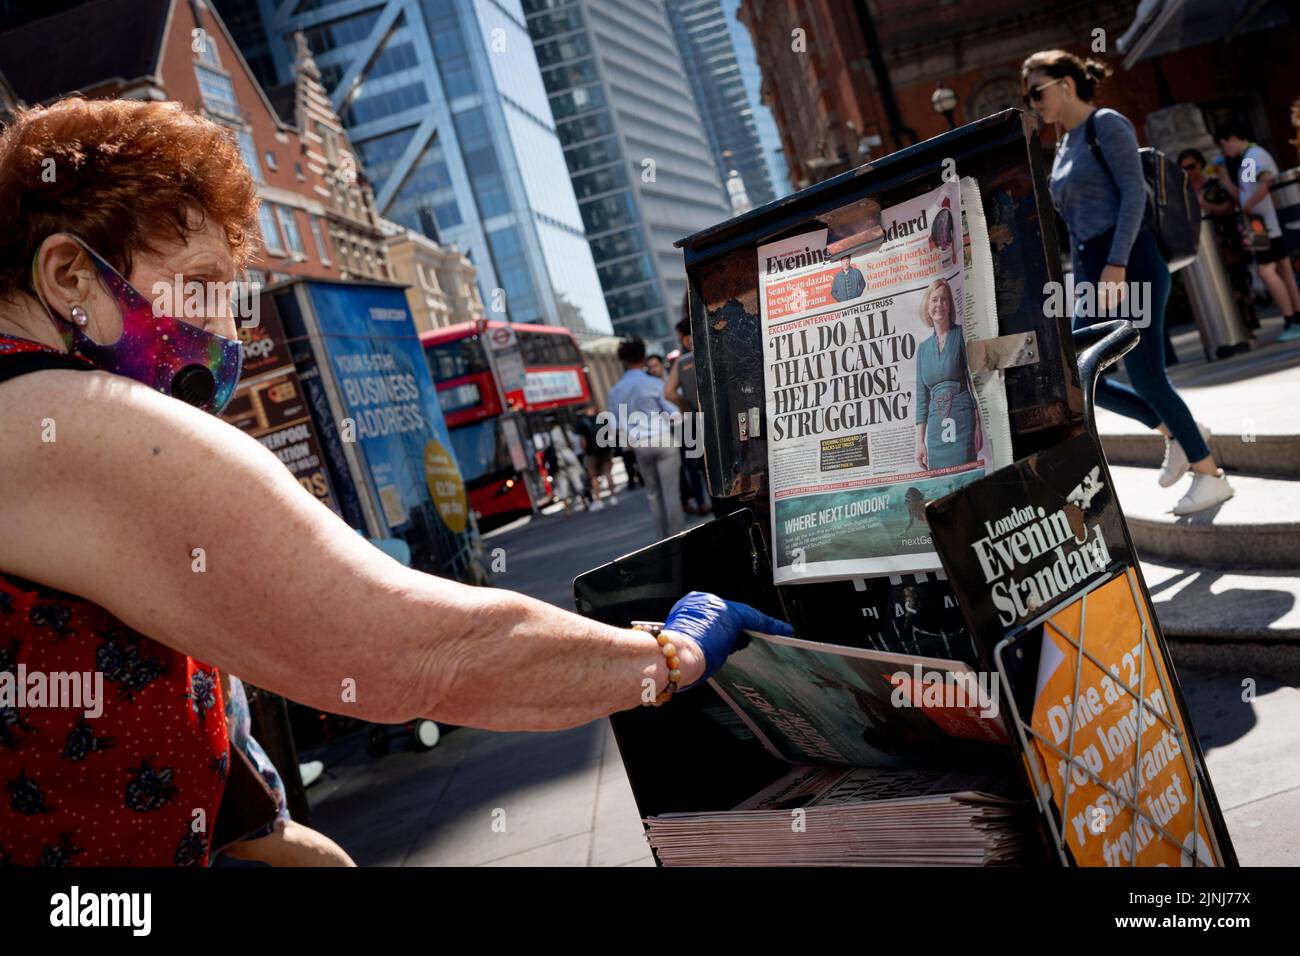 A woman takes a copy of an Evening Standard newspaper whose headline quotes Prime Ministerial contender Liz Truss during Conservative party leadership race, at Liverpool Street station in the City of London, the capital's financial district (aka the Square Mille), on 10th August 2022, in London, England. Stock Photo